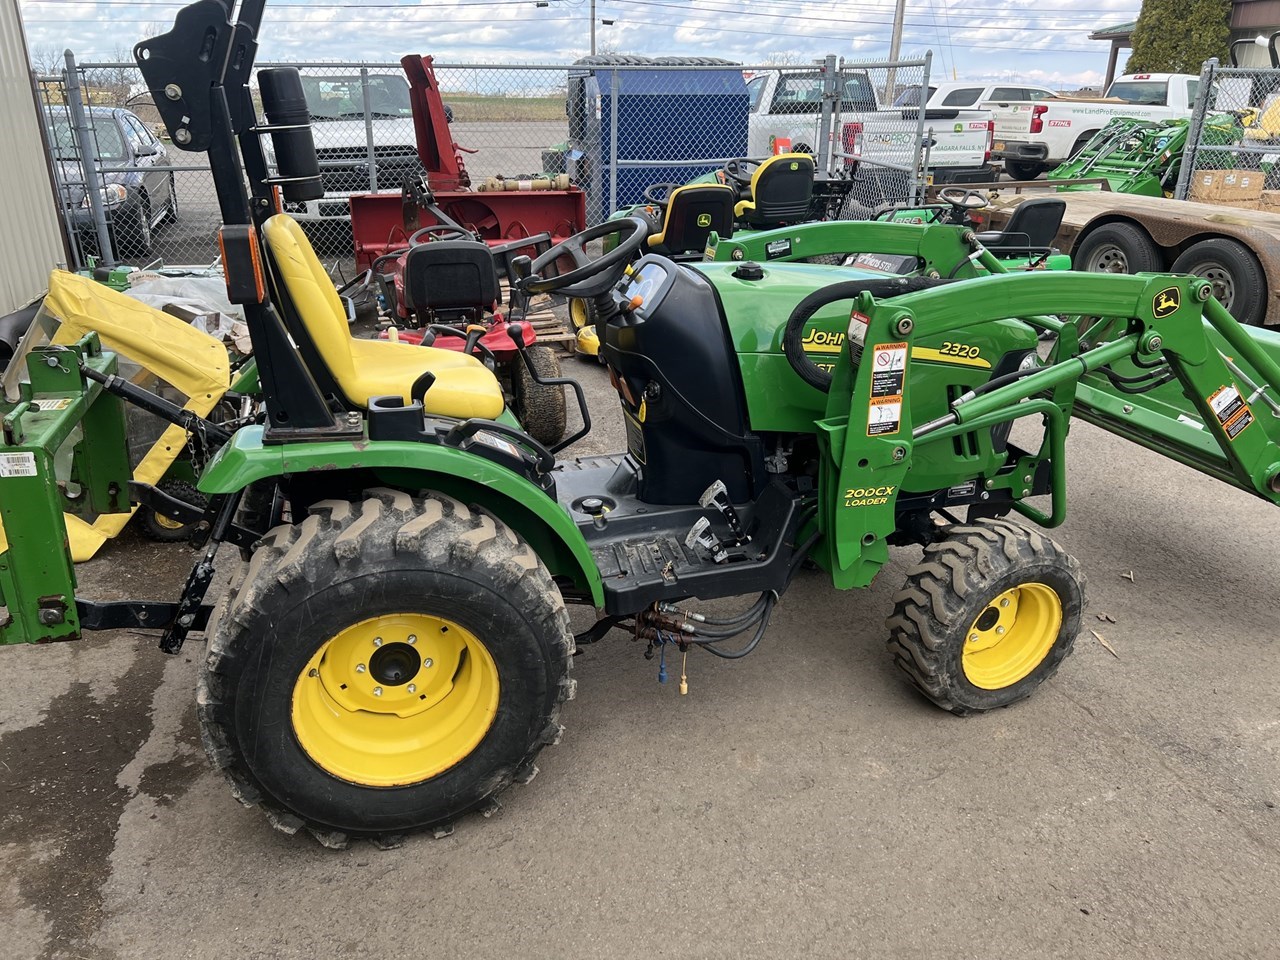 2010 John Deere 2320 Tractor - Compact Utility For Sale